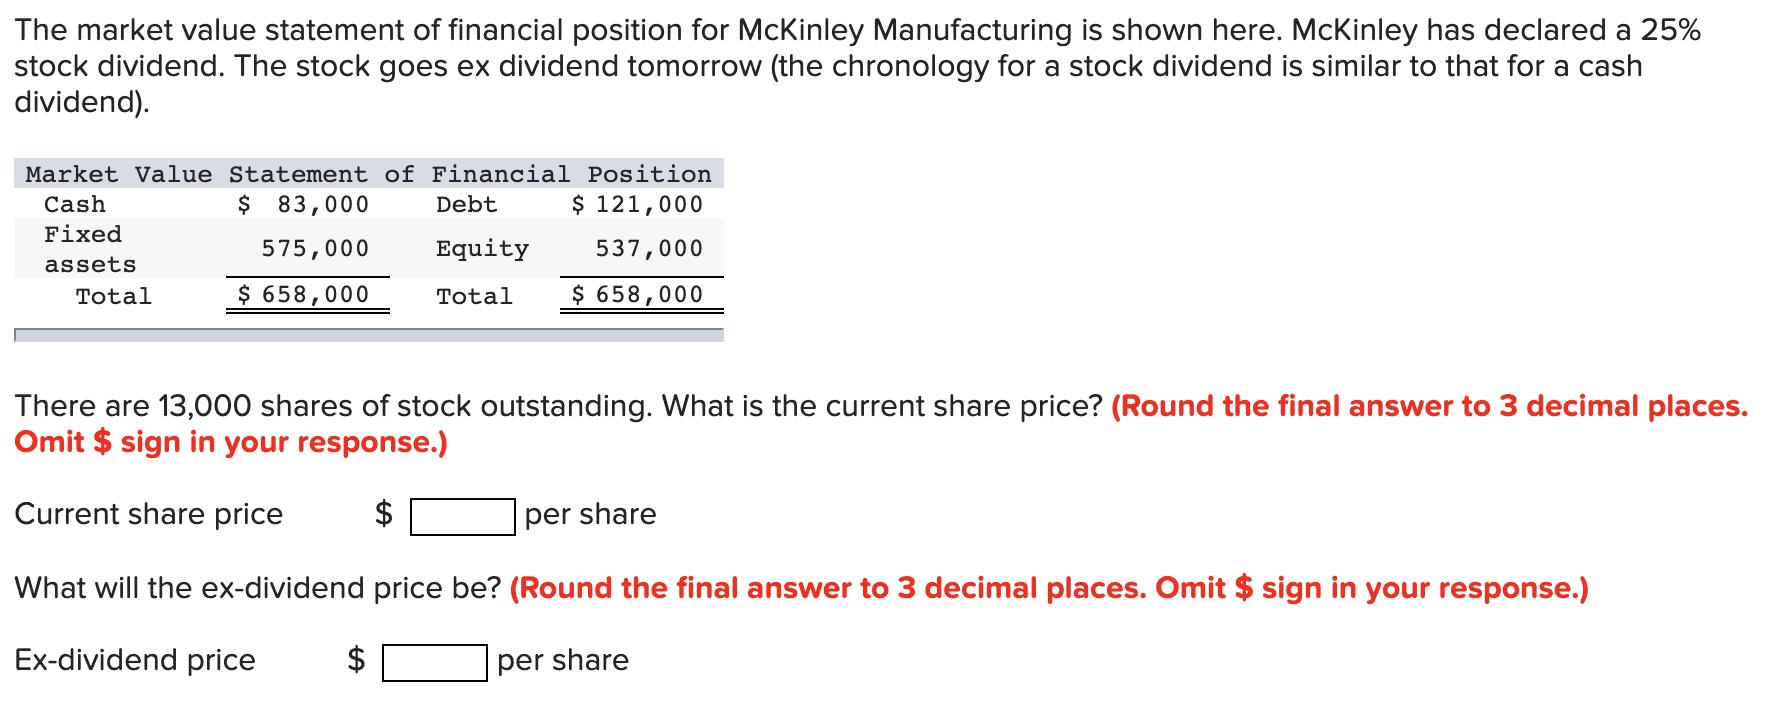 The market value statement of financial position for McKinley Manufacturing is shown here. McKinley has declared a 25%stock